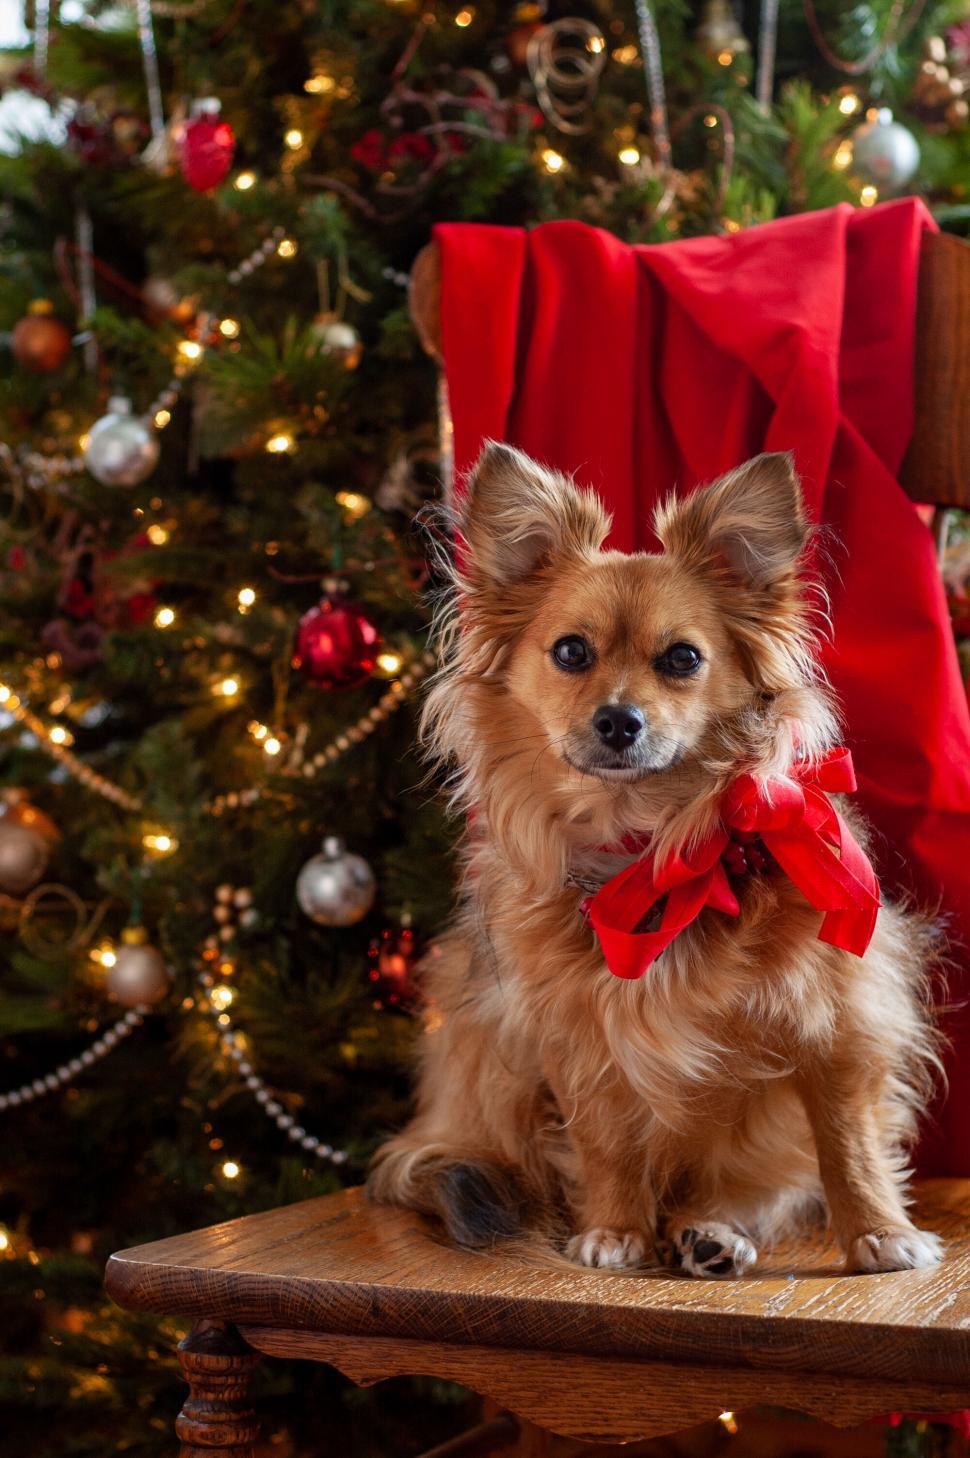 Free Image of Dog wearing a red bow by Christmas tree 